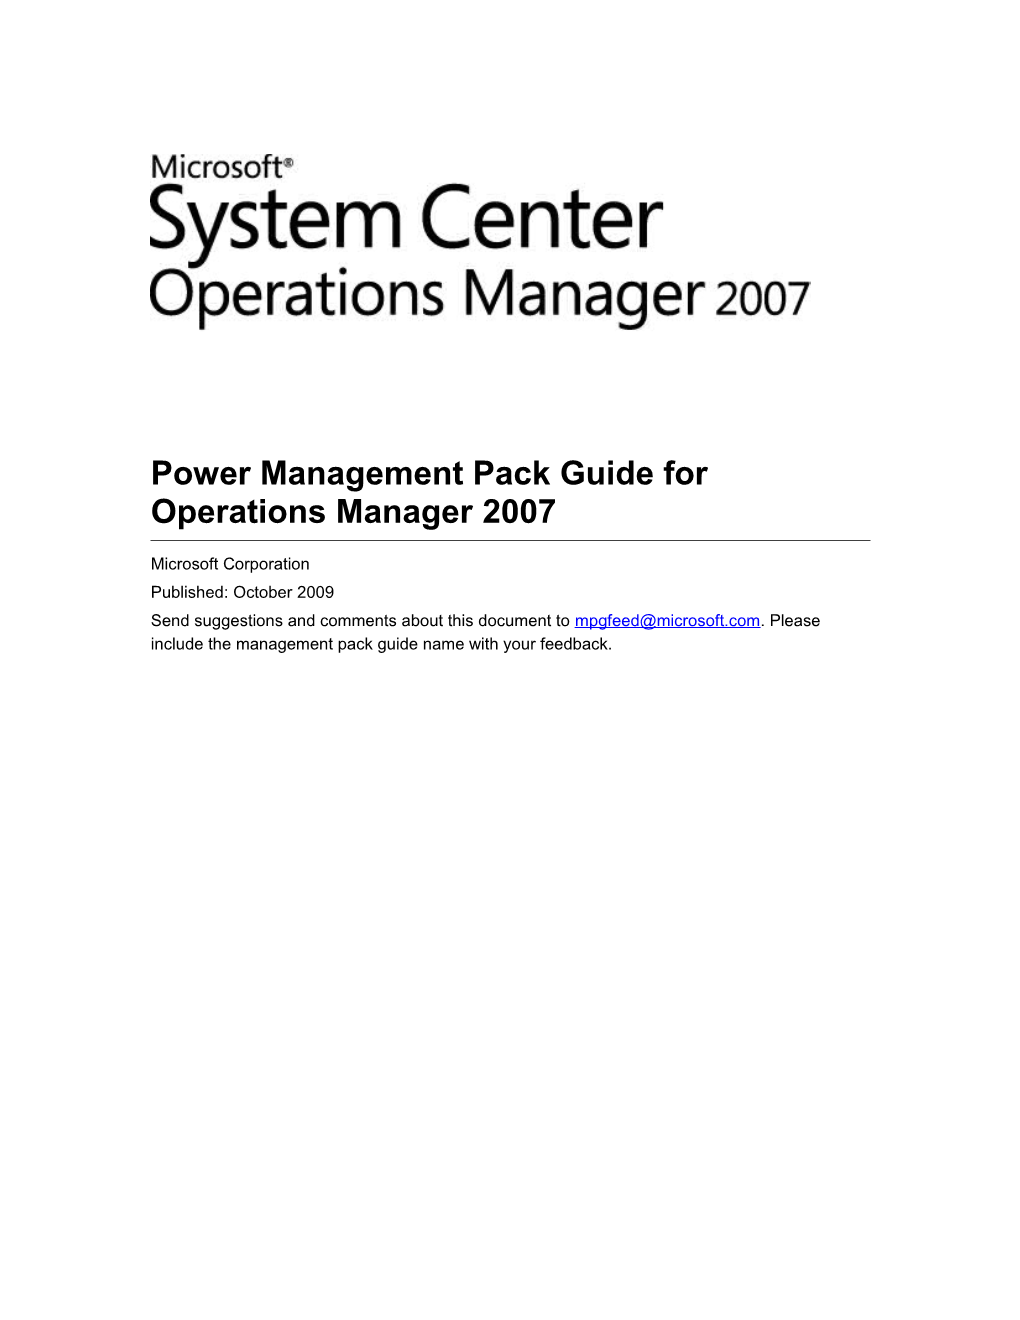 Power Management Pack Guide for Operations Manager2007